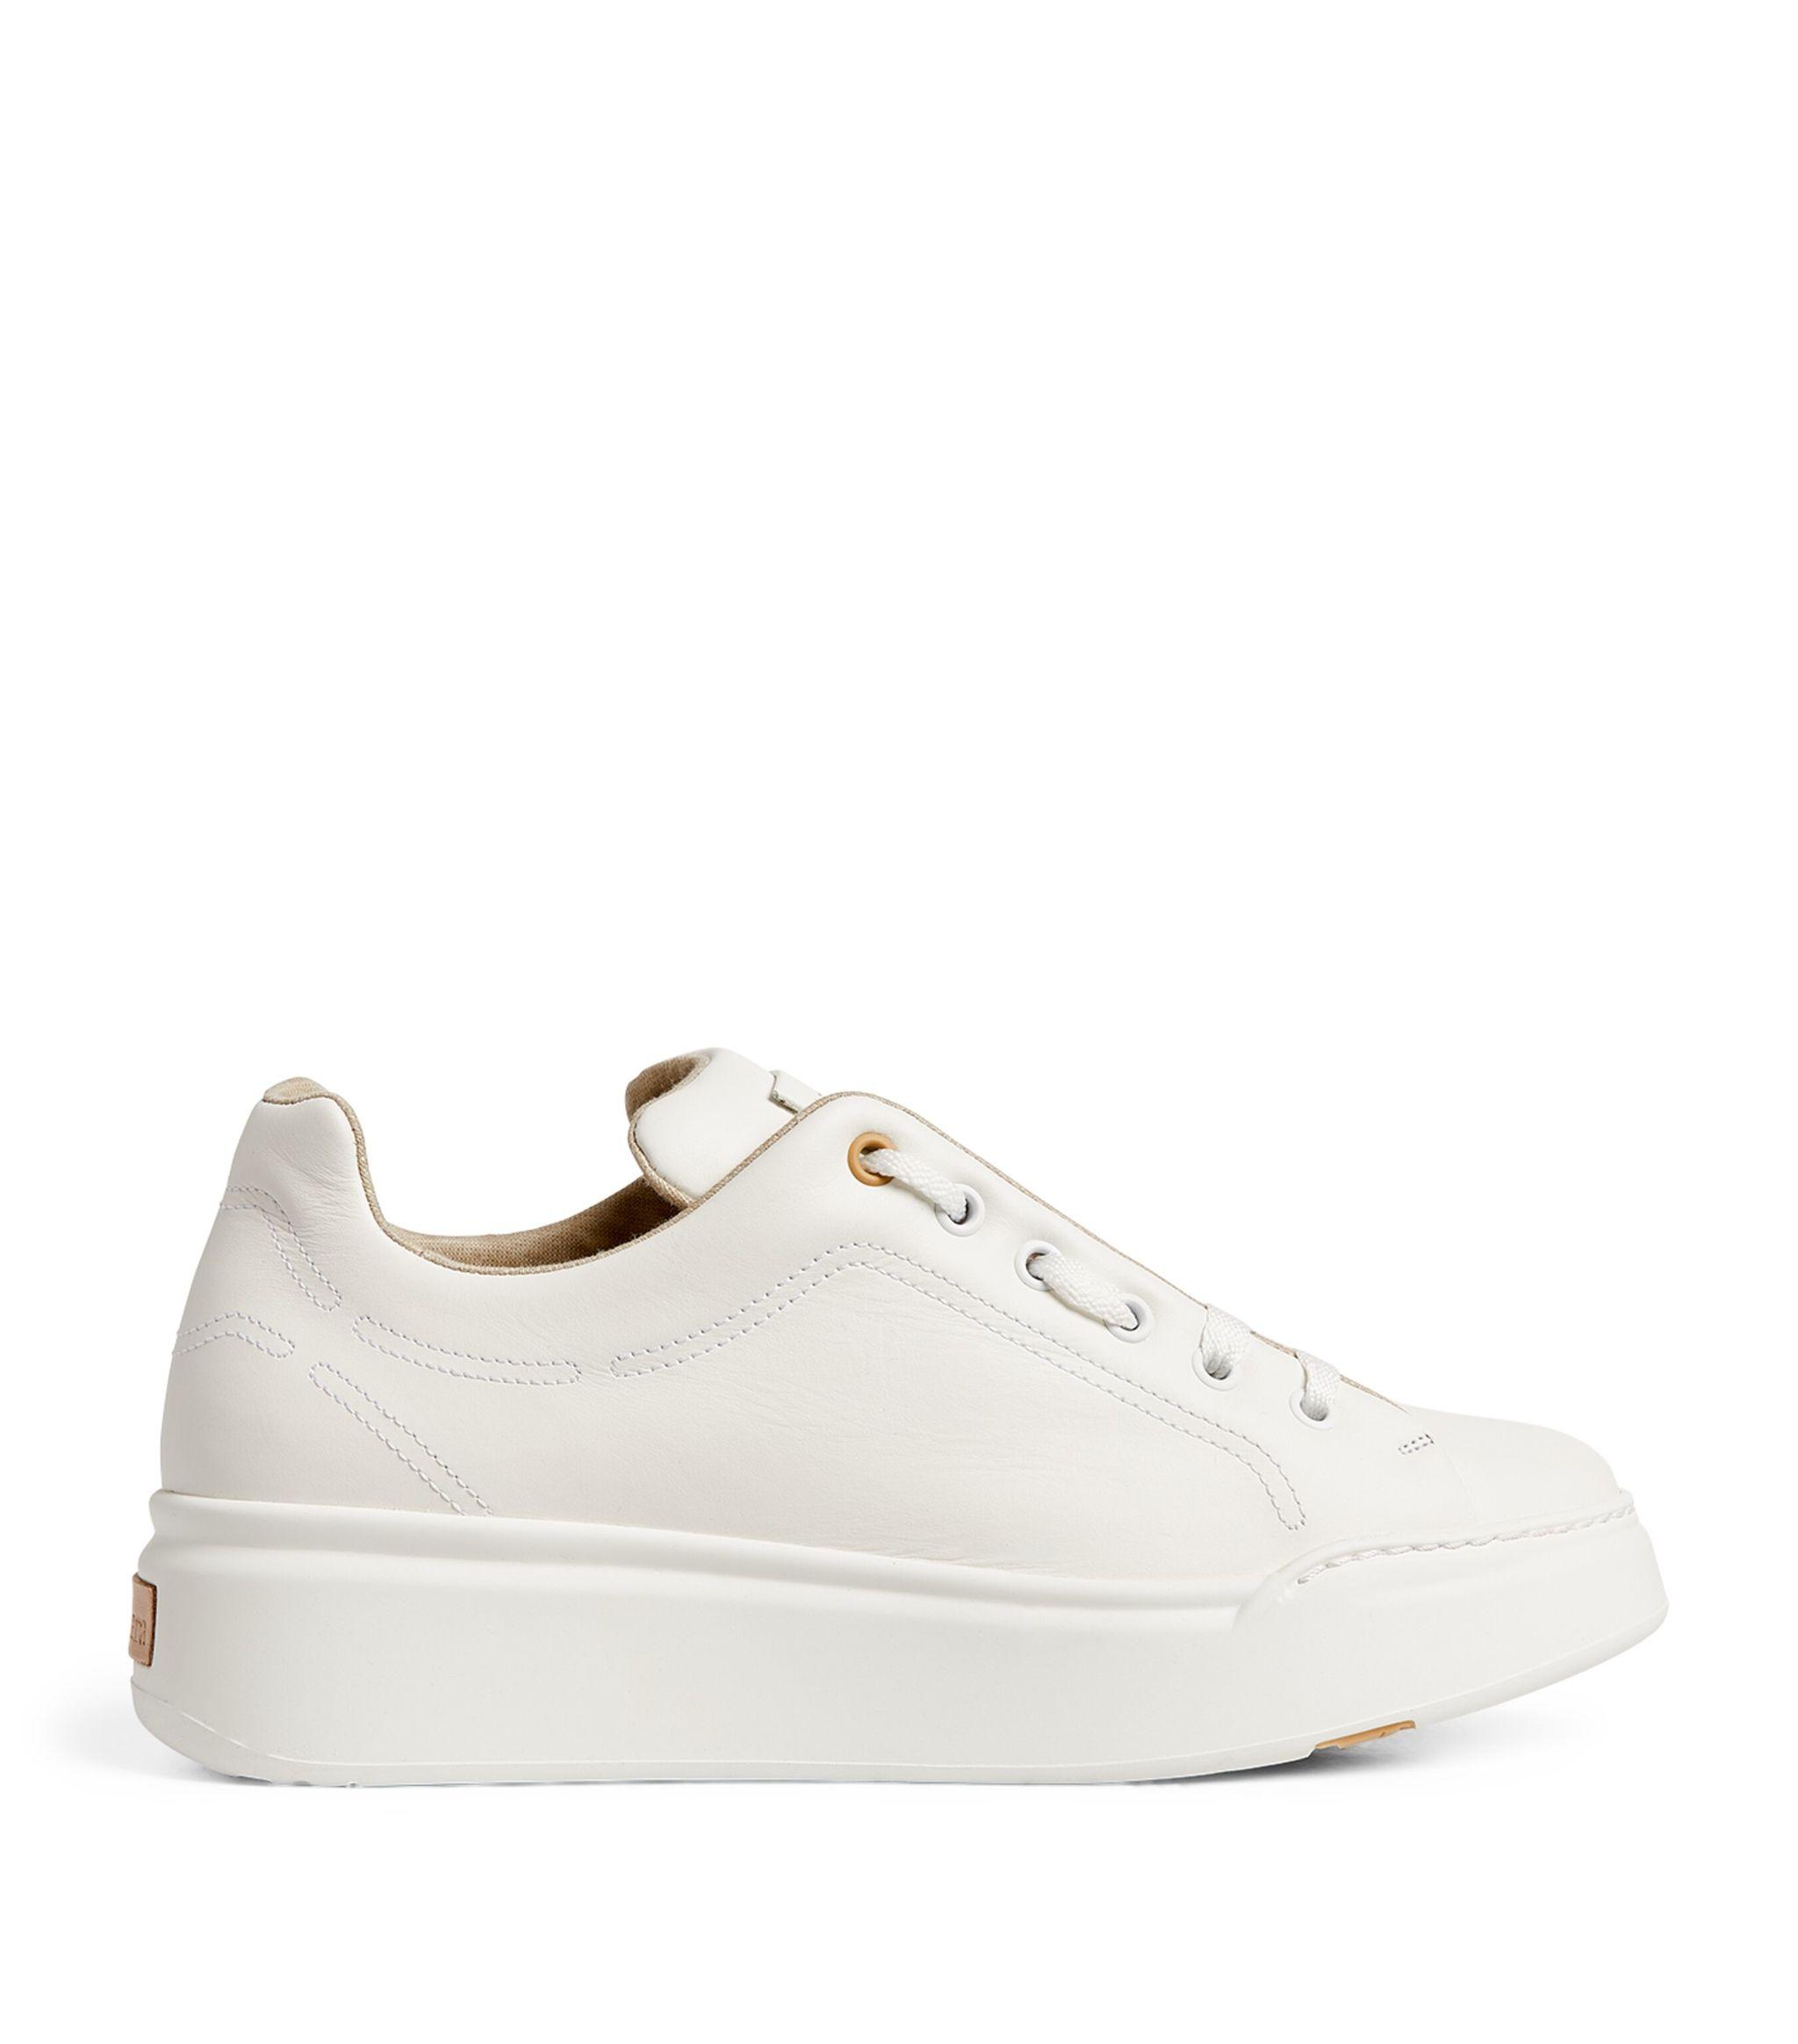 Max Mara Leather Sneakers in White | Lyst